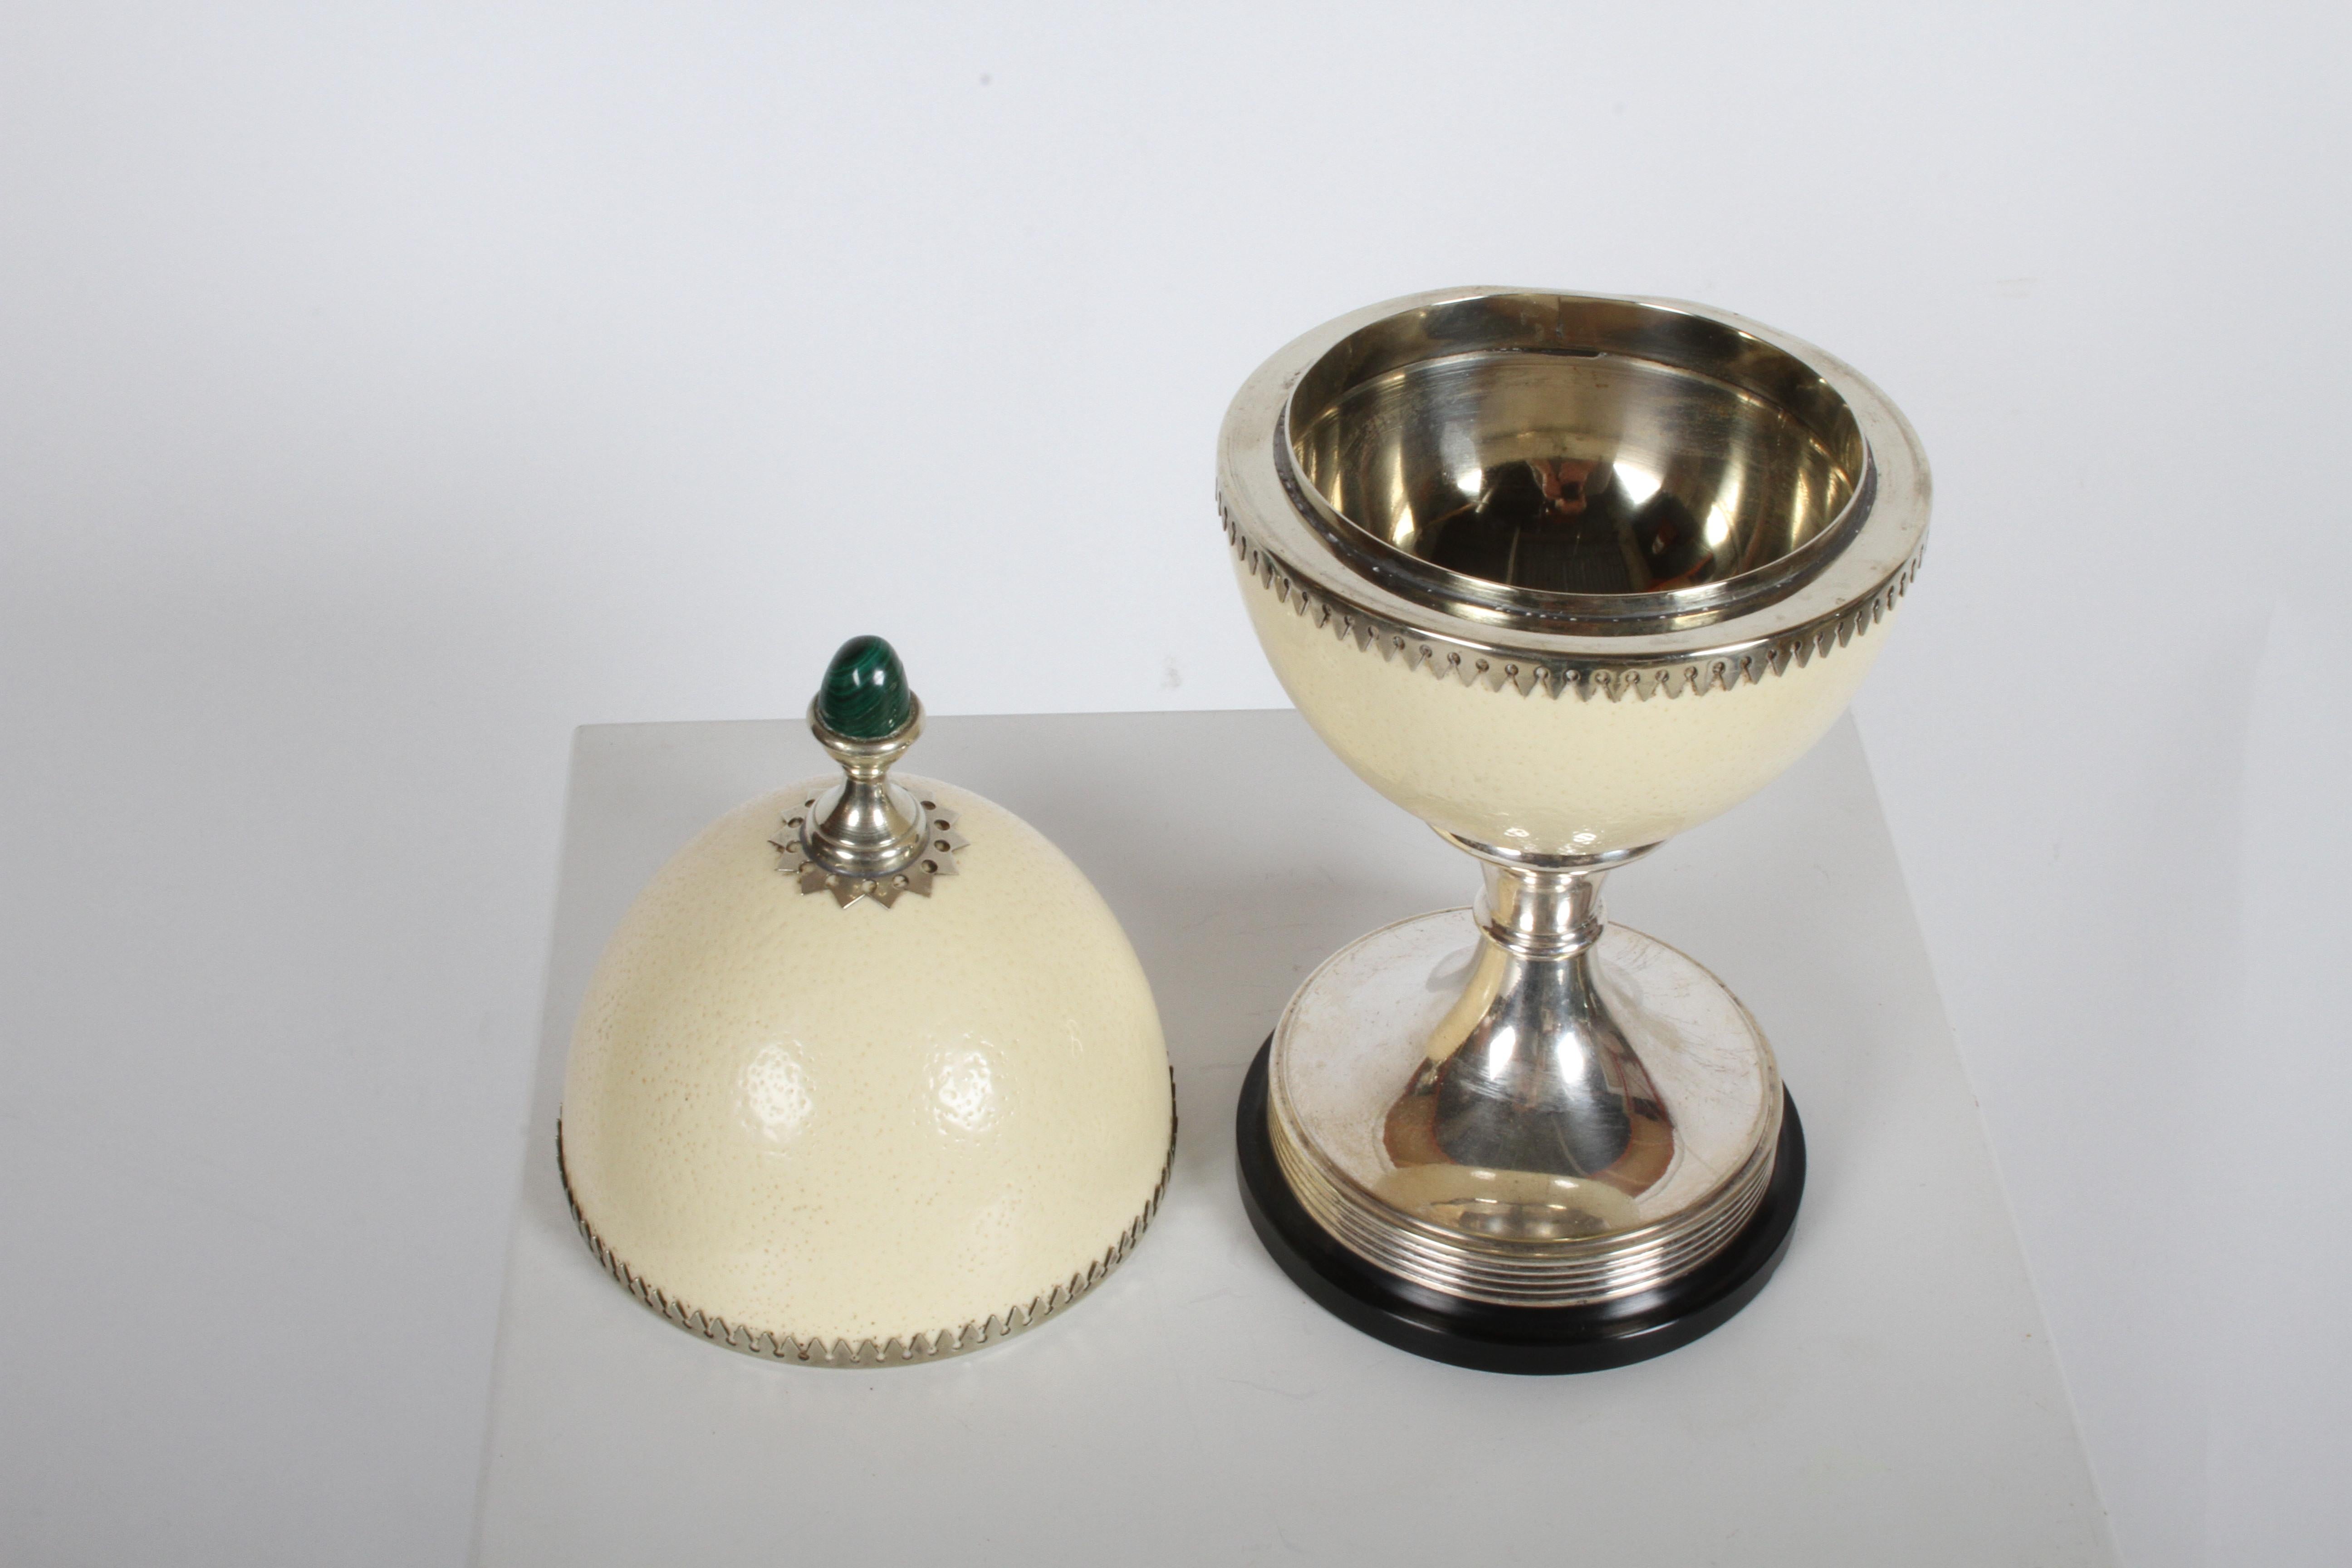 J. Antony Redmile London Ostrich Egg w/ Malachite Finial Silver Plated Box 1970s In Good Condition For Sale In St. Louis, MO